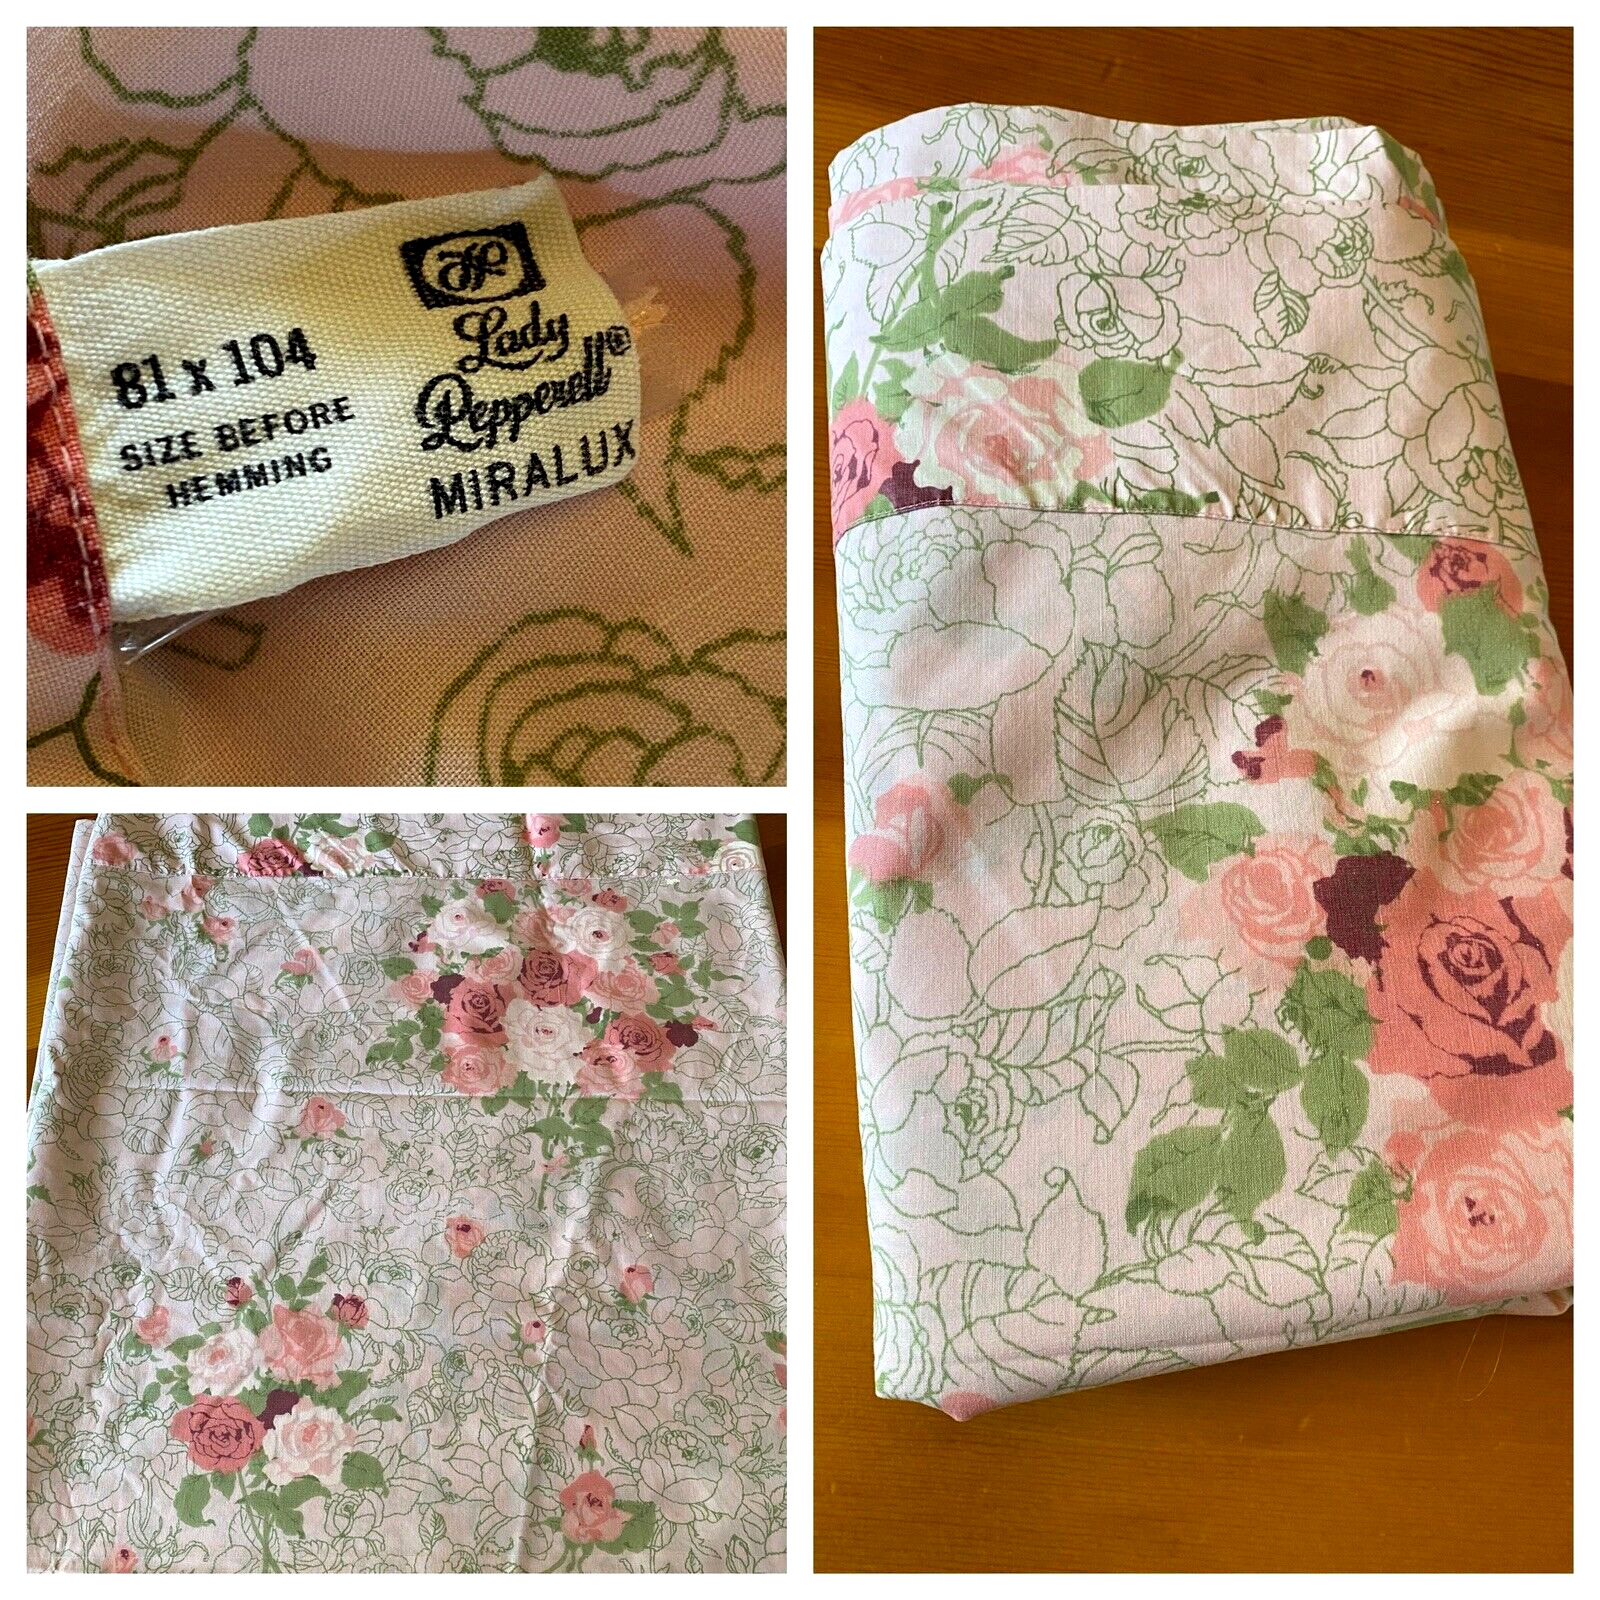 VTG 7O'S LADY PEPPERELL MID CENTURY PINK FLORAL PERCALE FLAT SHEET SZ FULL